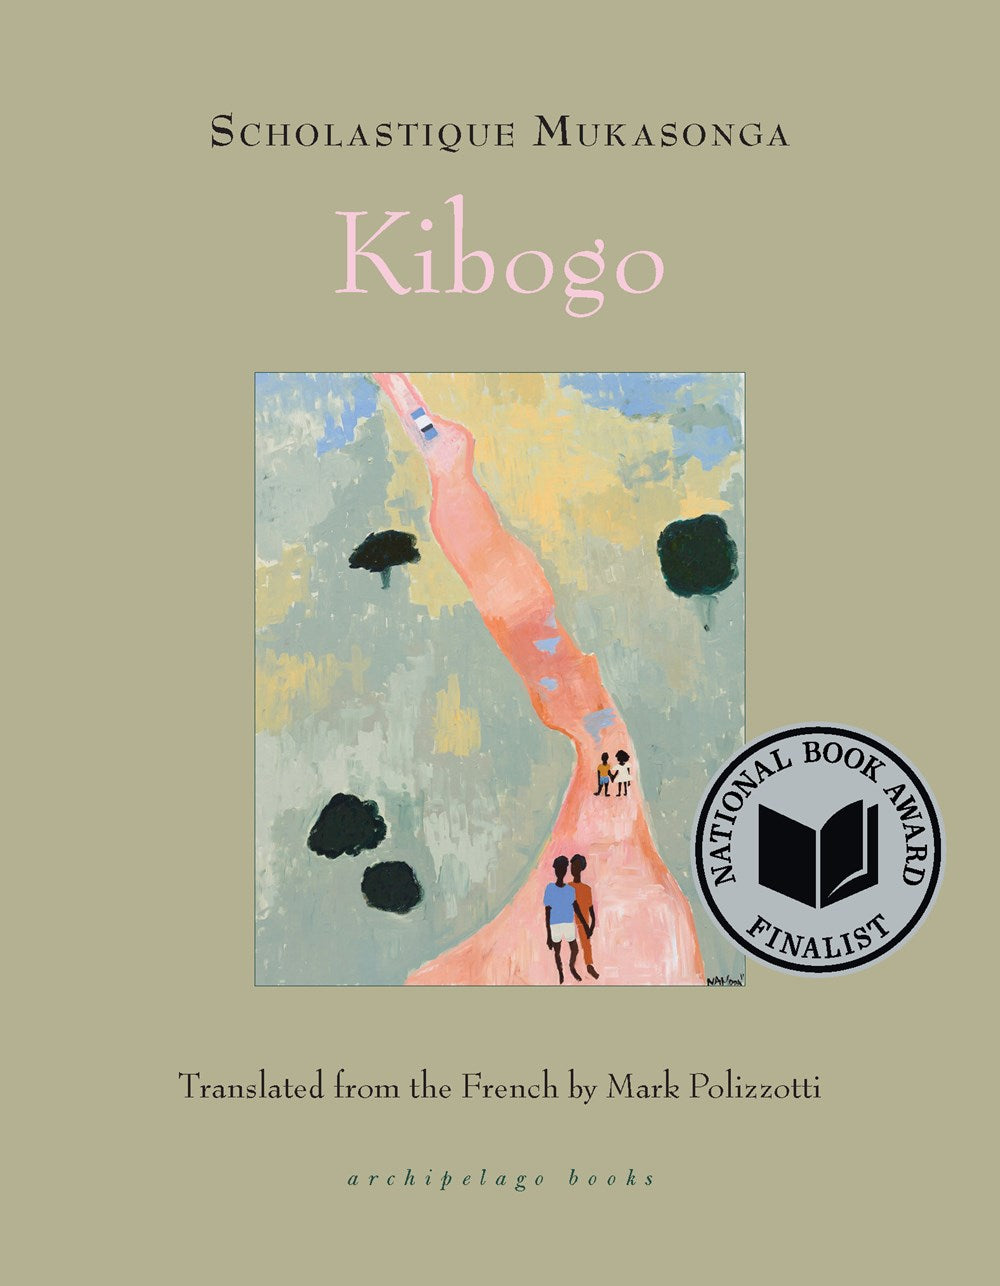 Kibogo by Scholastique Mukasonga (Translated from the French by Mark Polizzotti)